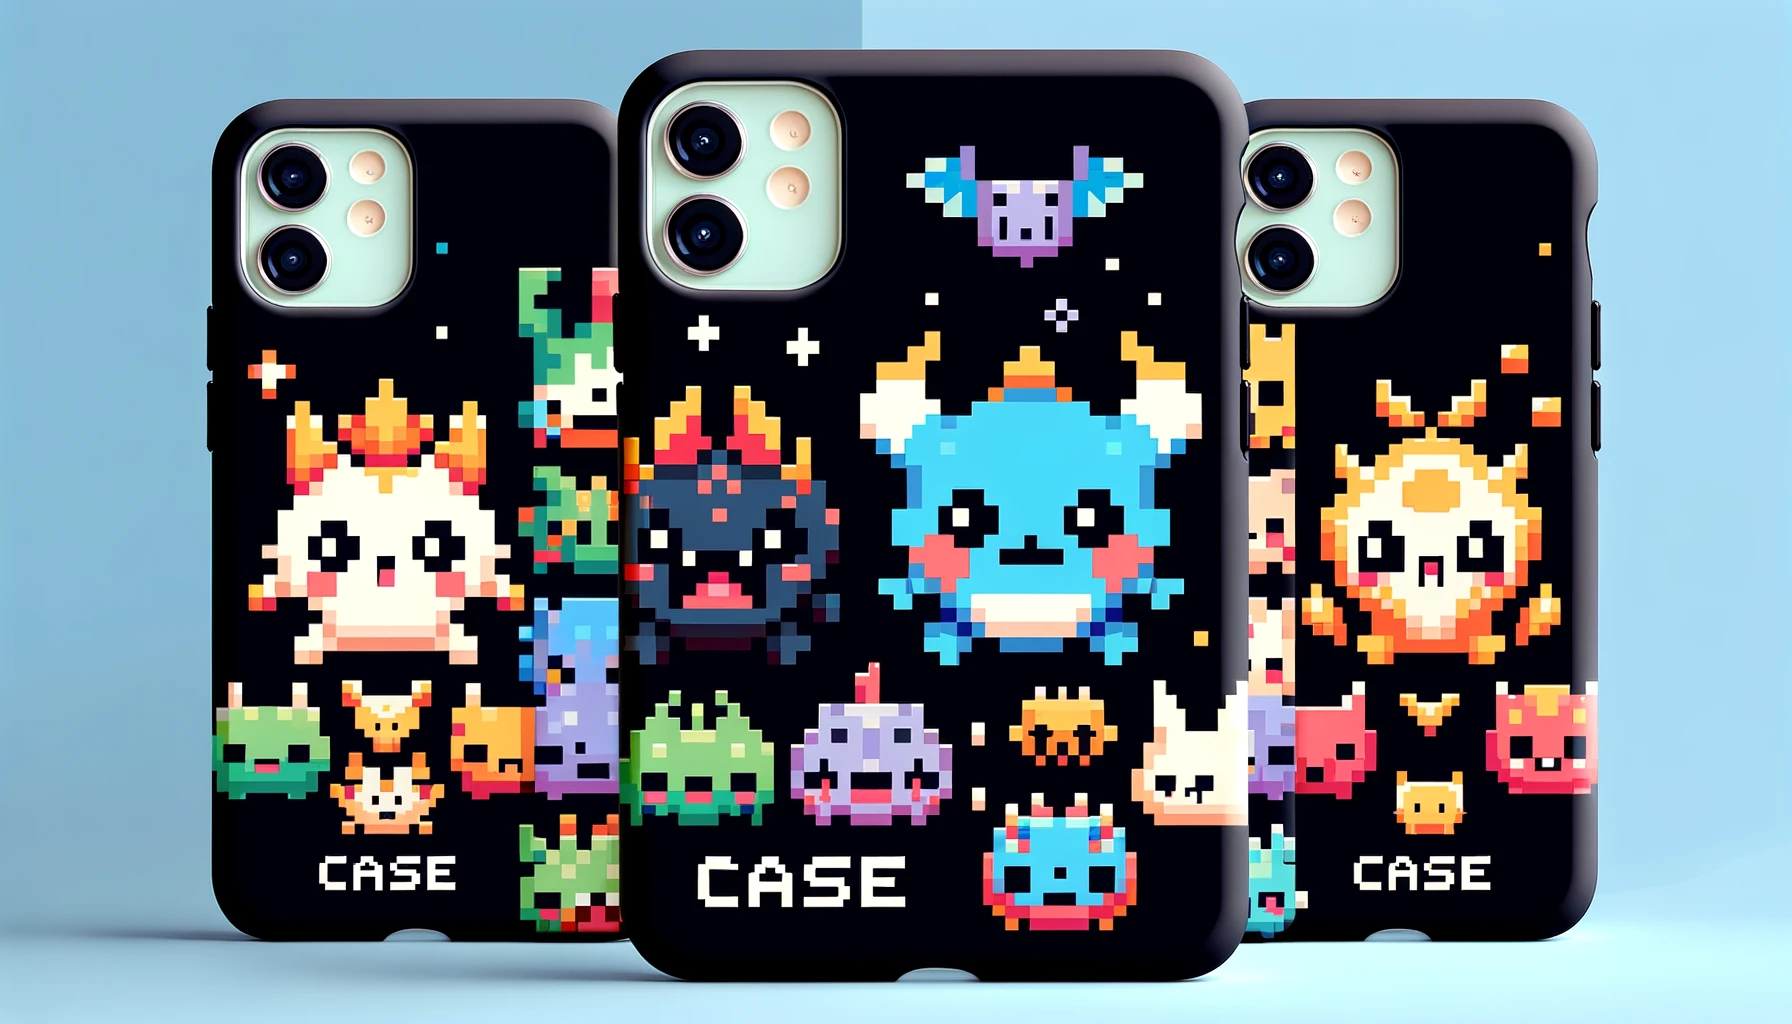 An engaging image showcasing CASETiFY smartphone cases with pixel art designs of small monster anime characters. The design should highlight the retro, pixelated art style and the variety of colorful, charming characters. The word 'CASE' should be prominently displayed on the image.